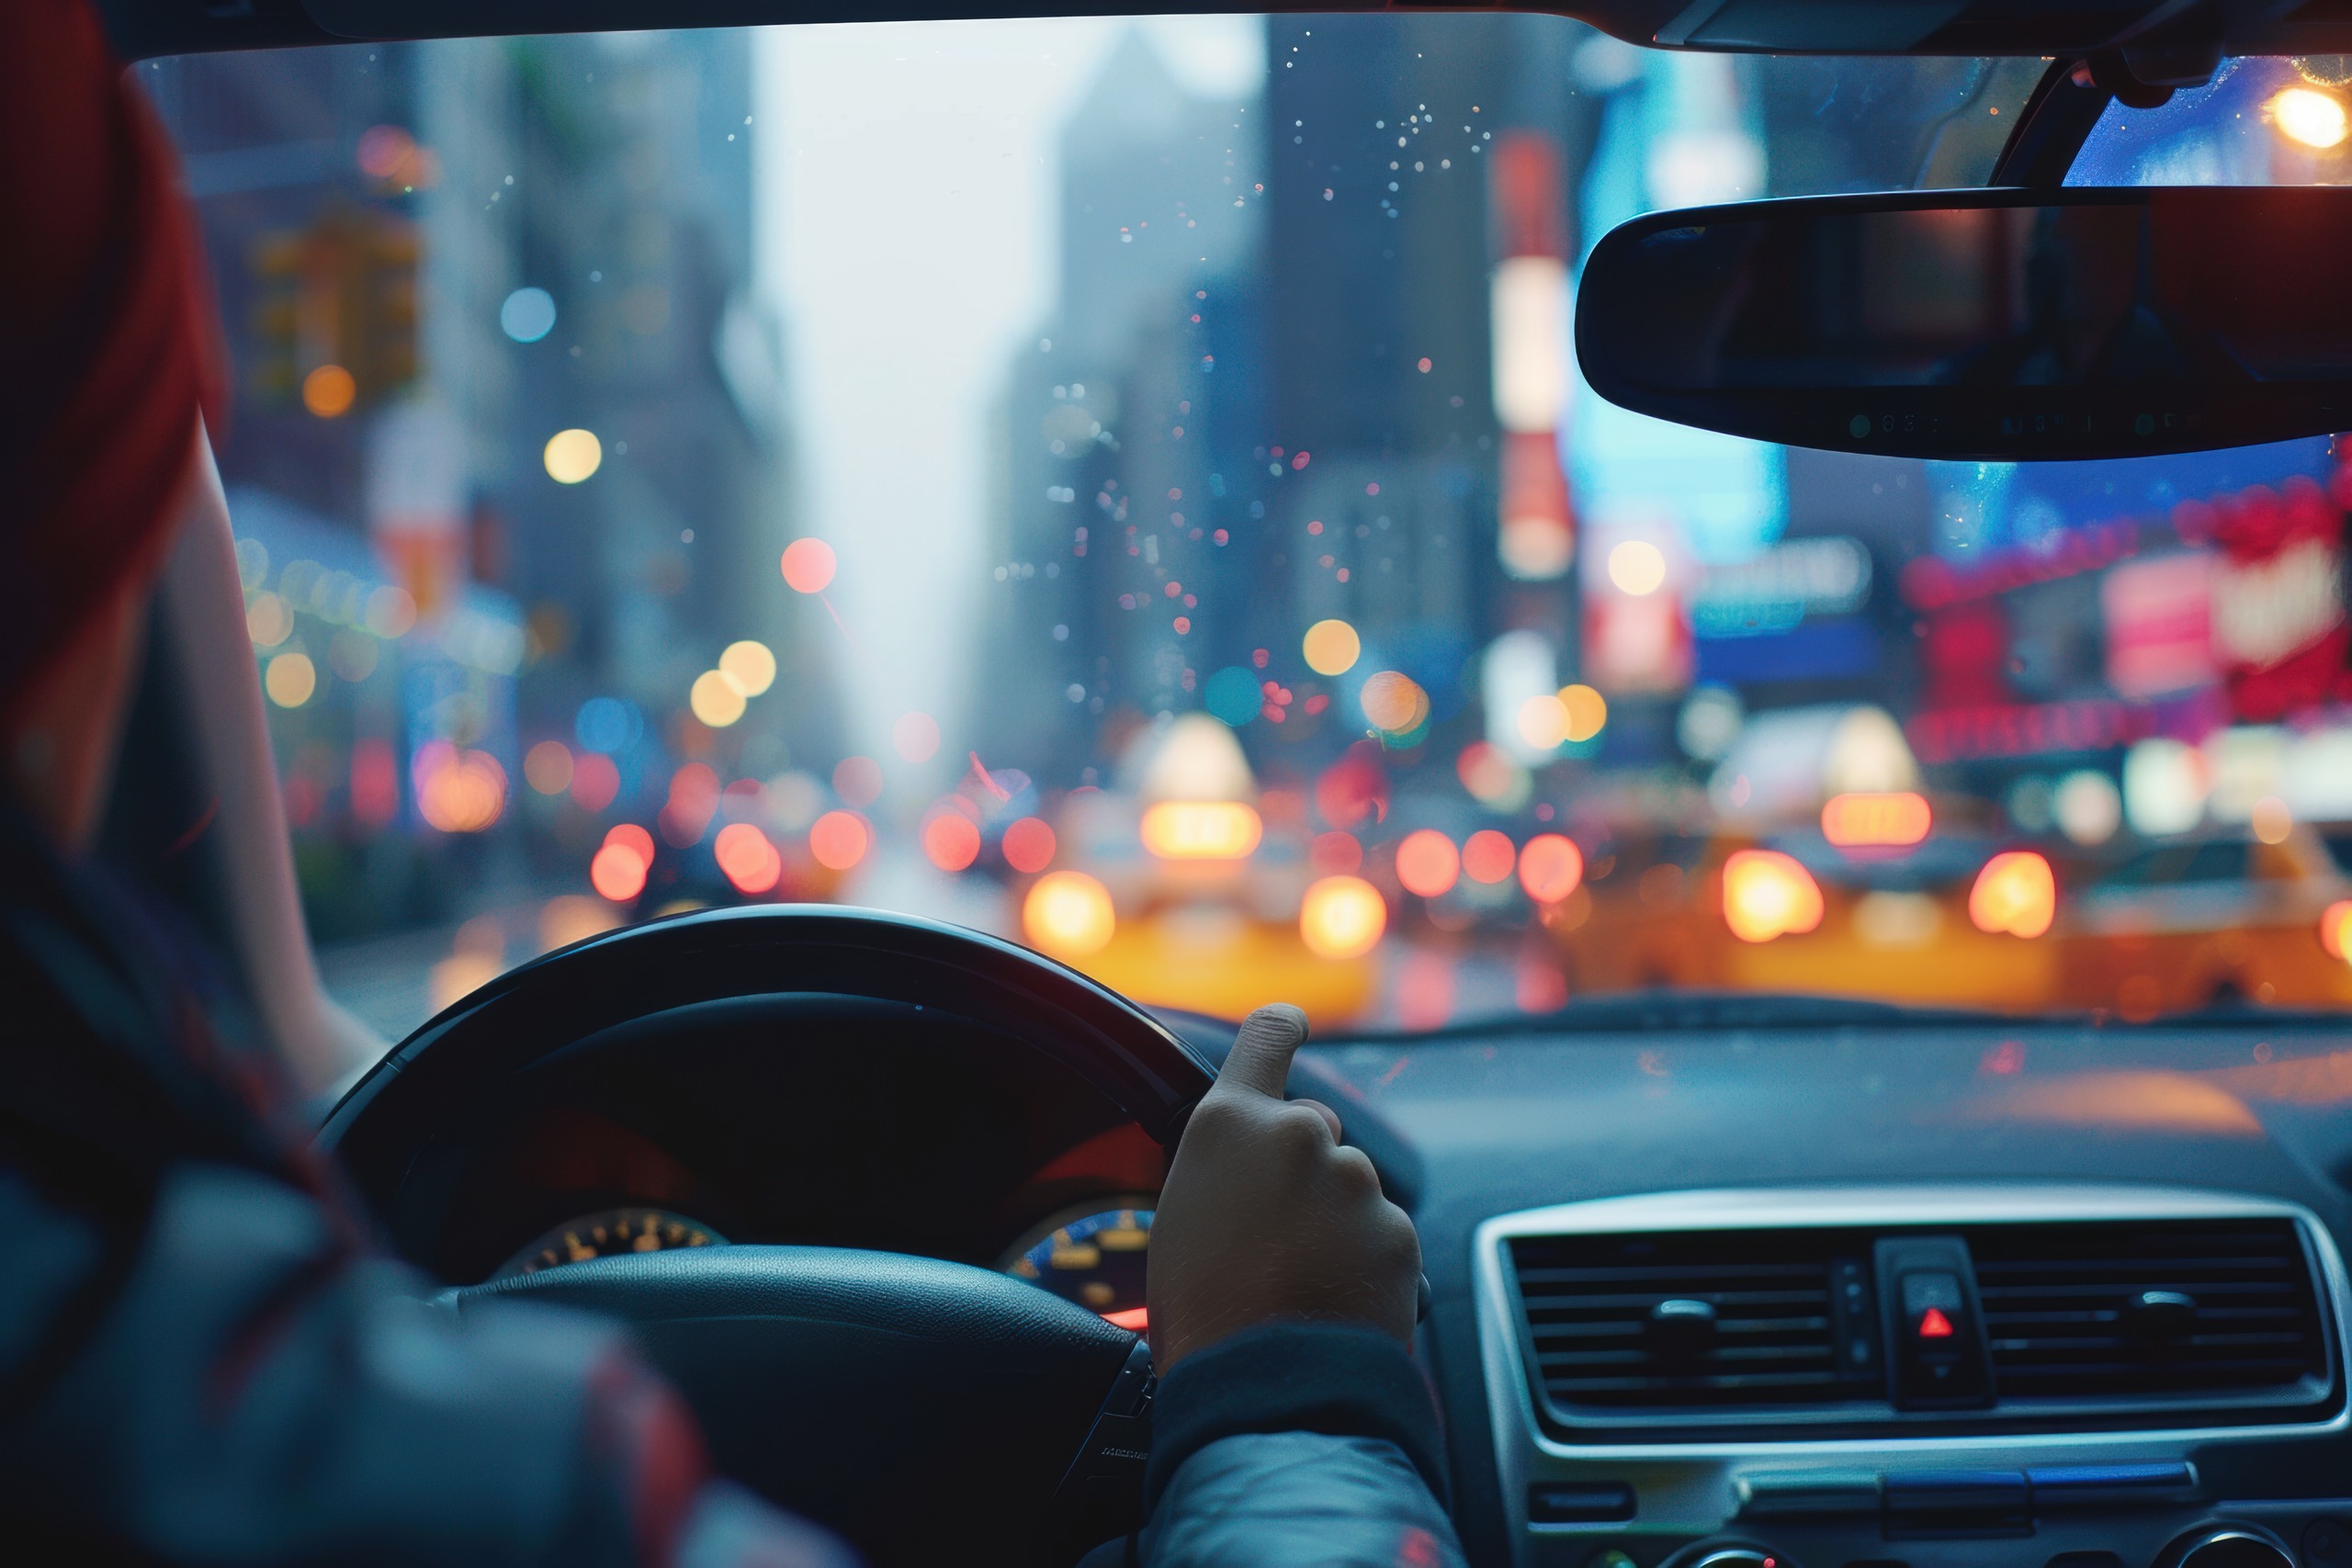 Filing a Claim Against a Rideshare Company in New Jersey